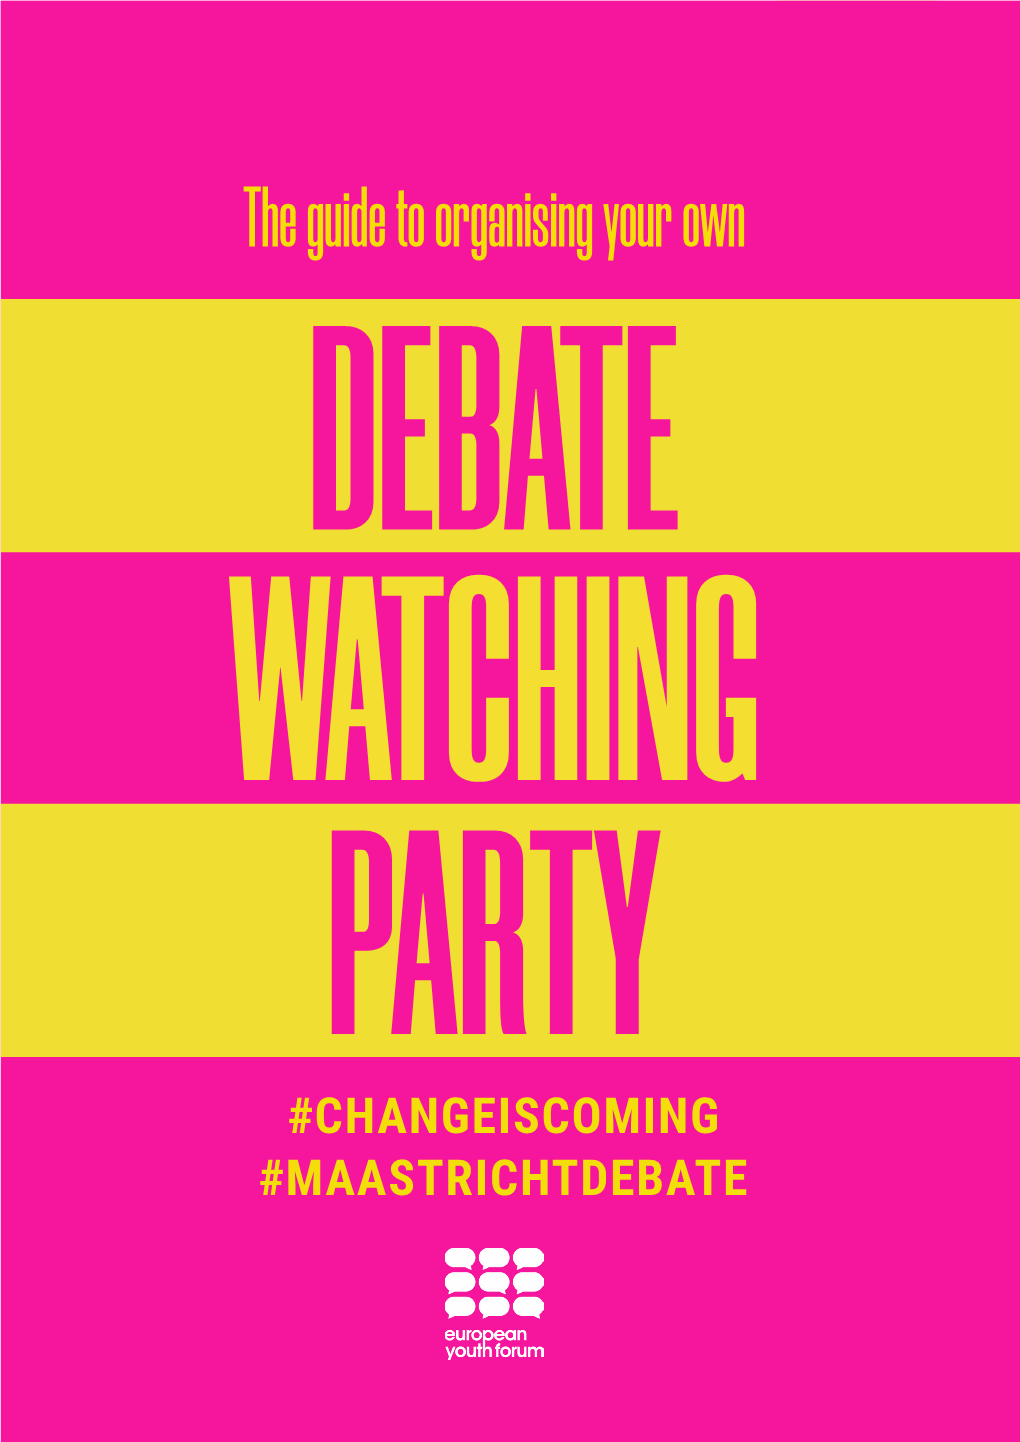 The Guide to Organising Your Own DEBATE WATCHING PARTY #CHANGEISCOMING #MAASTRICHTDEBATE CONTENTS